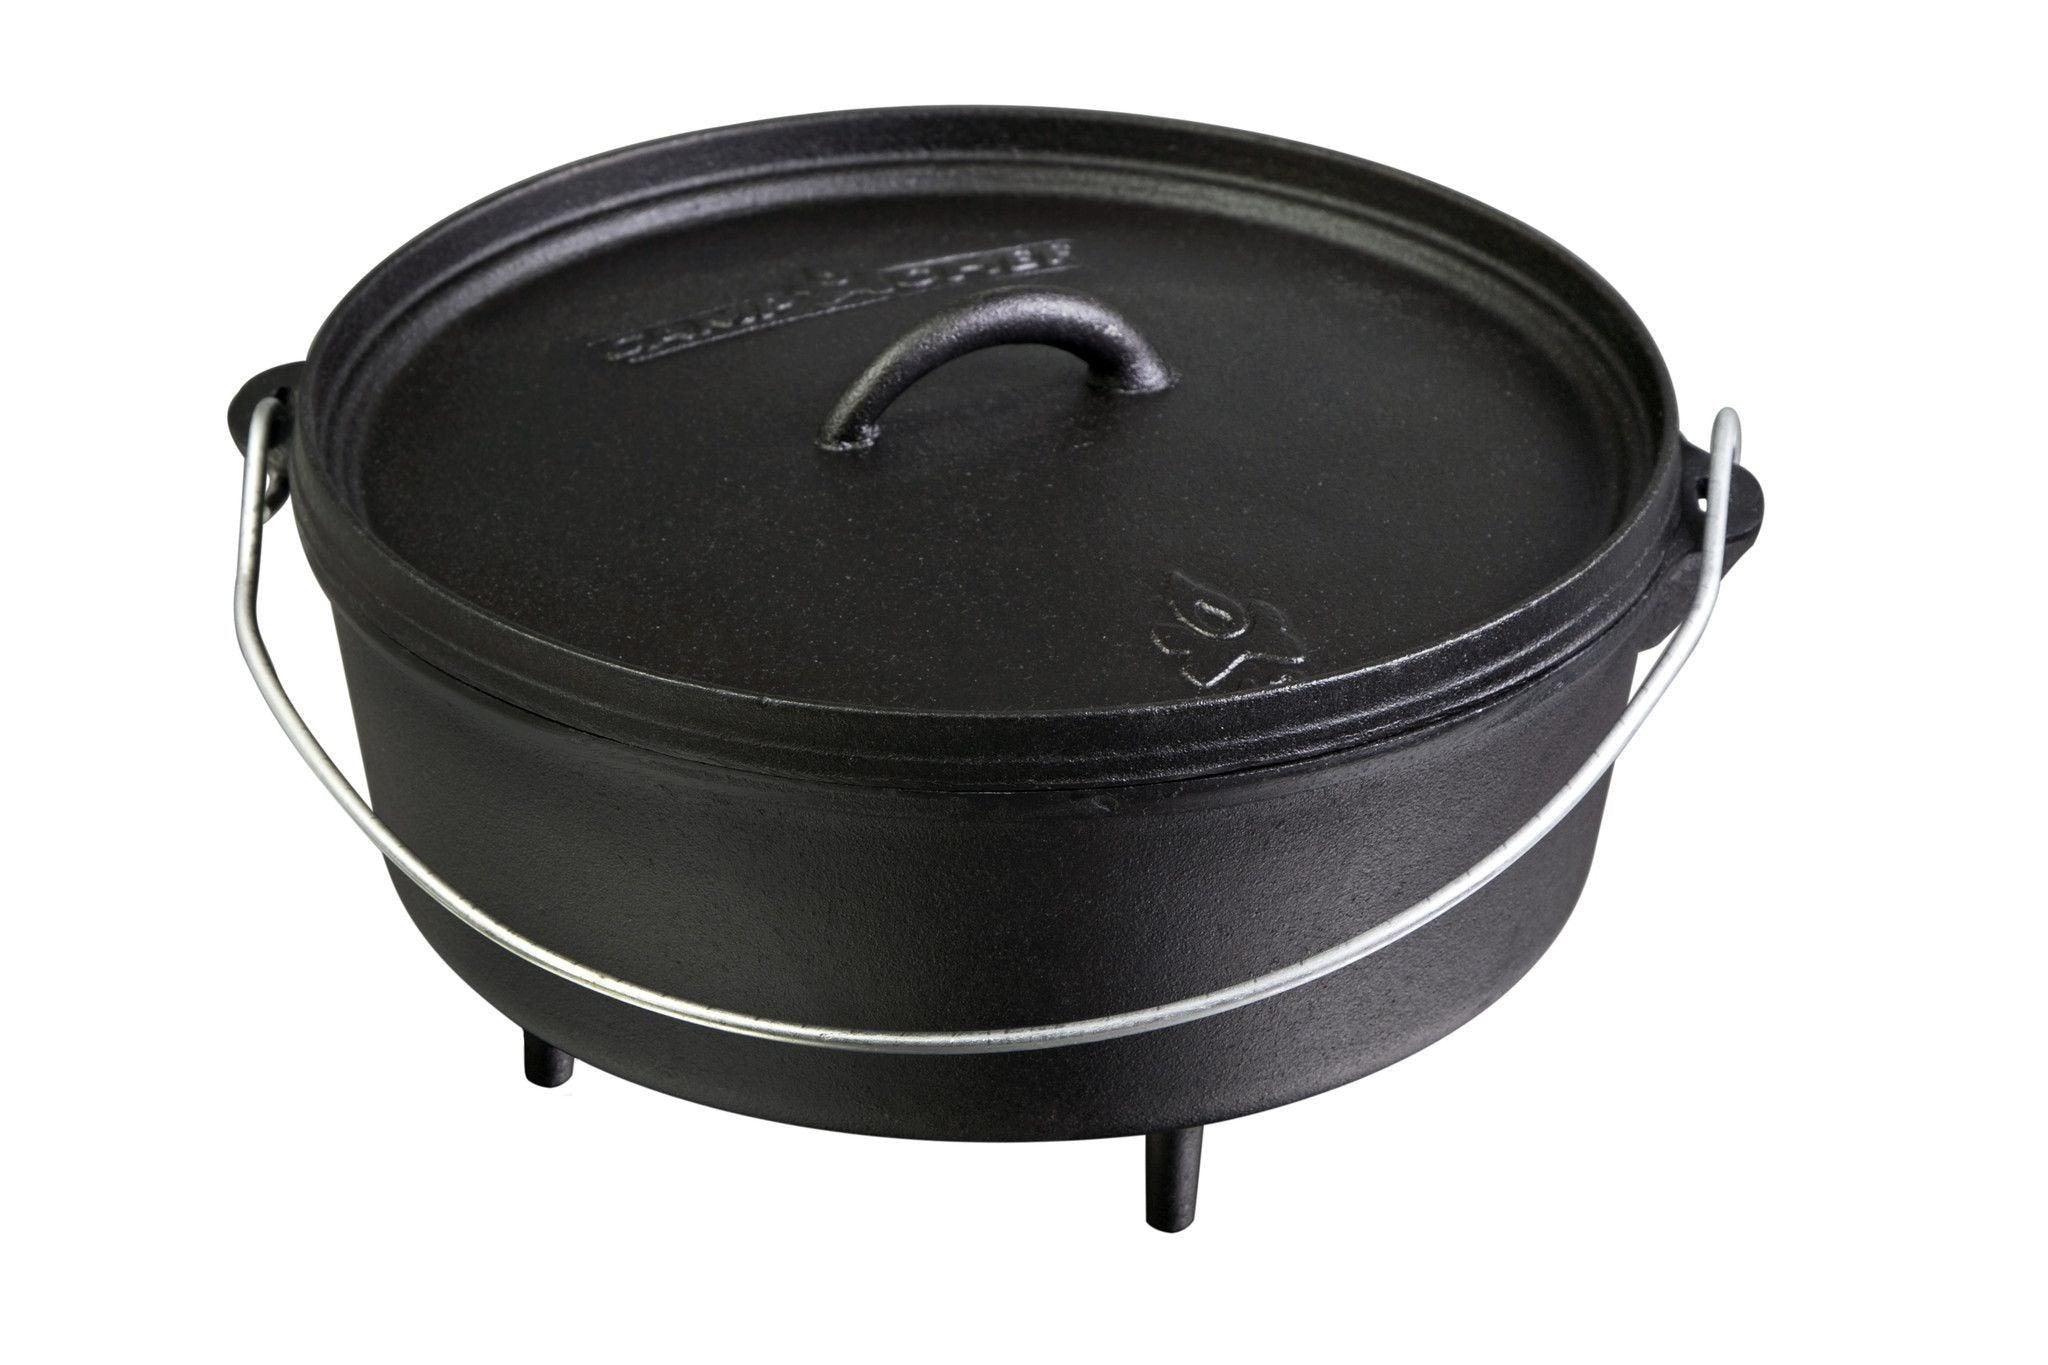 Camp Dutch Oven Care  How to Use Cast Iron Camp Dutch Ovens